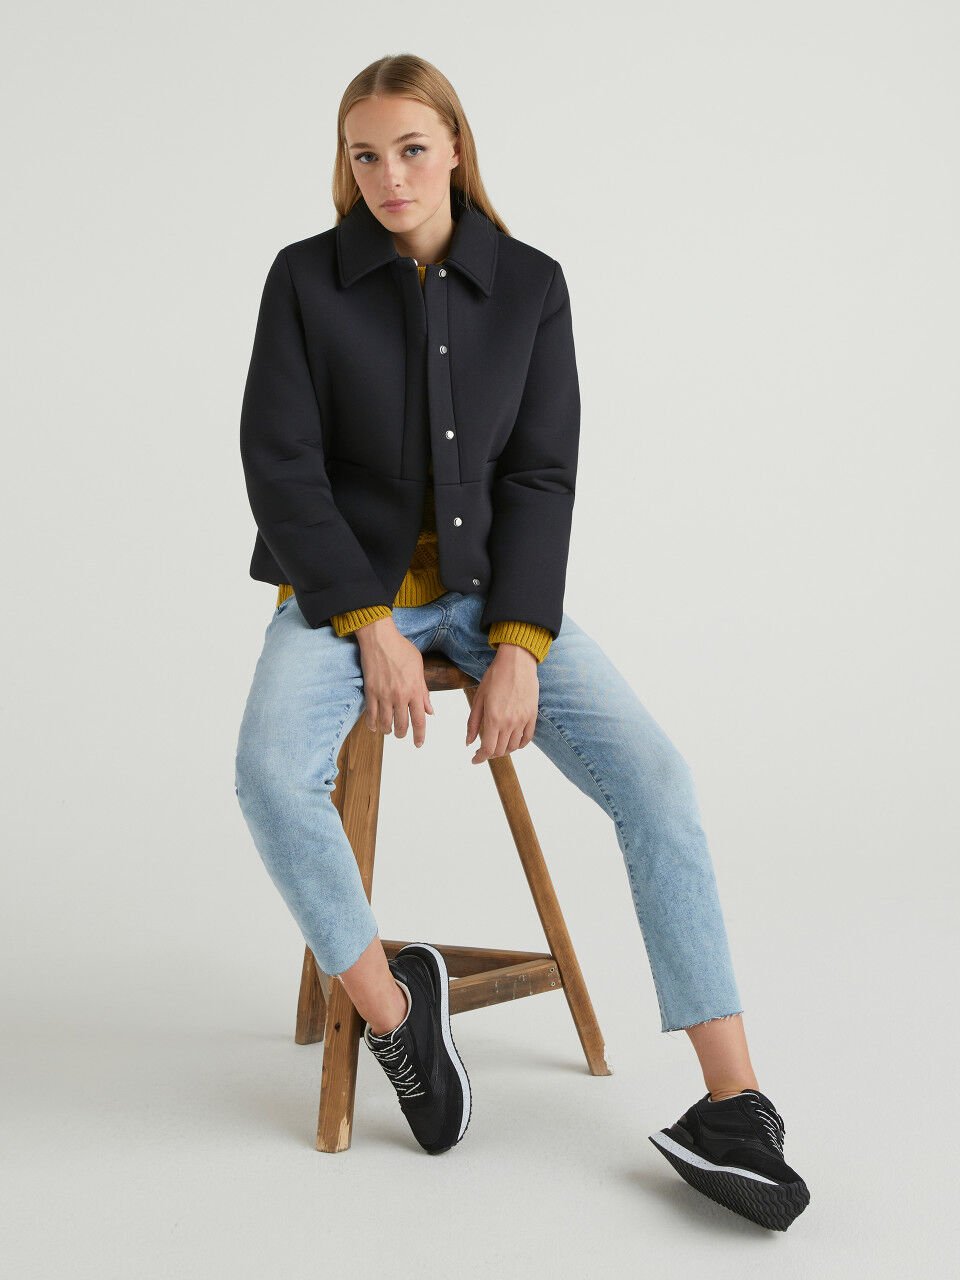 Women's Jackets and Coats Collection 2022 | Benetton